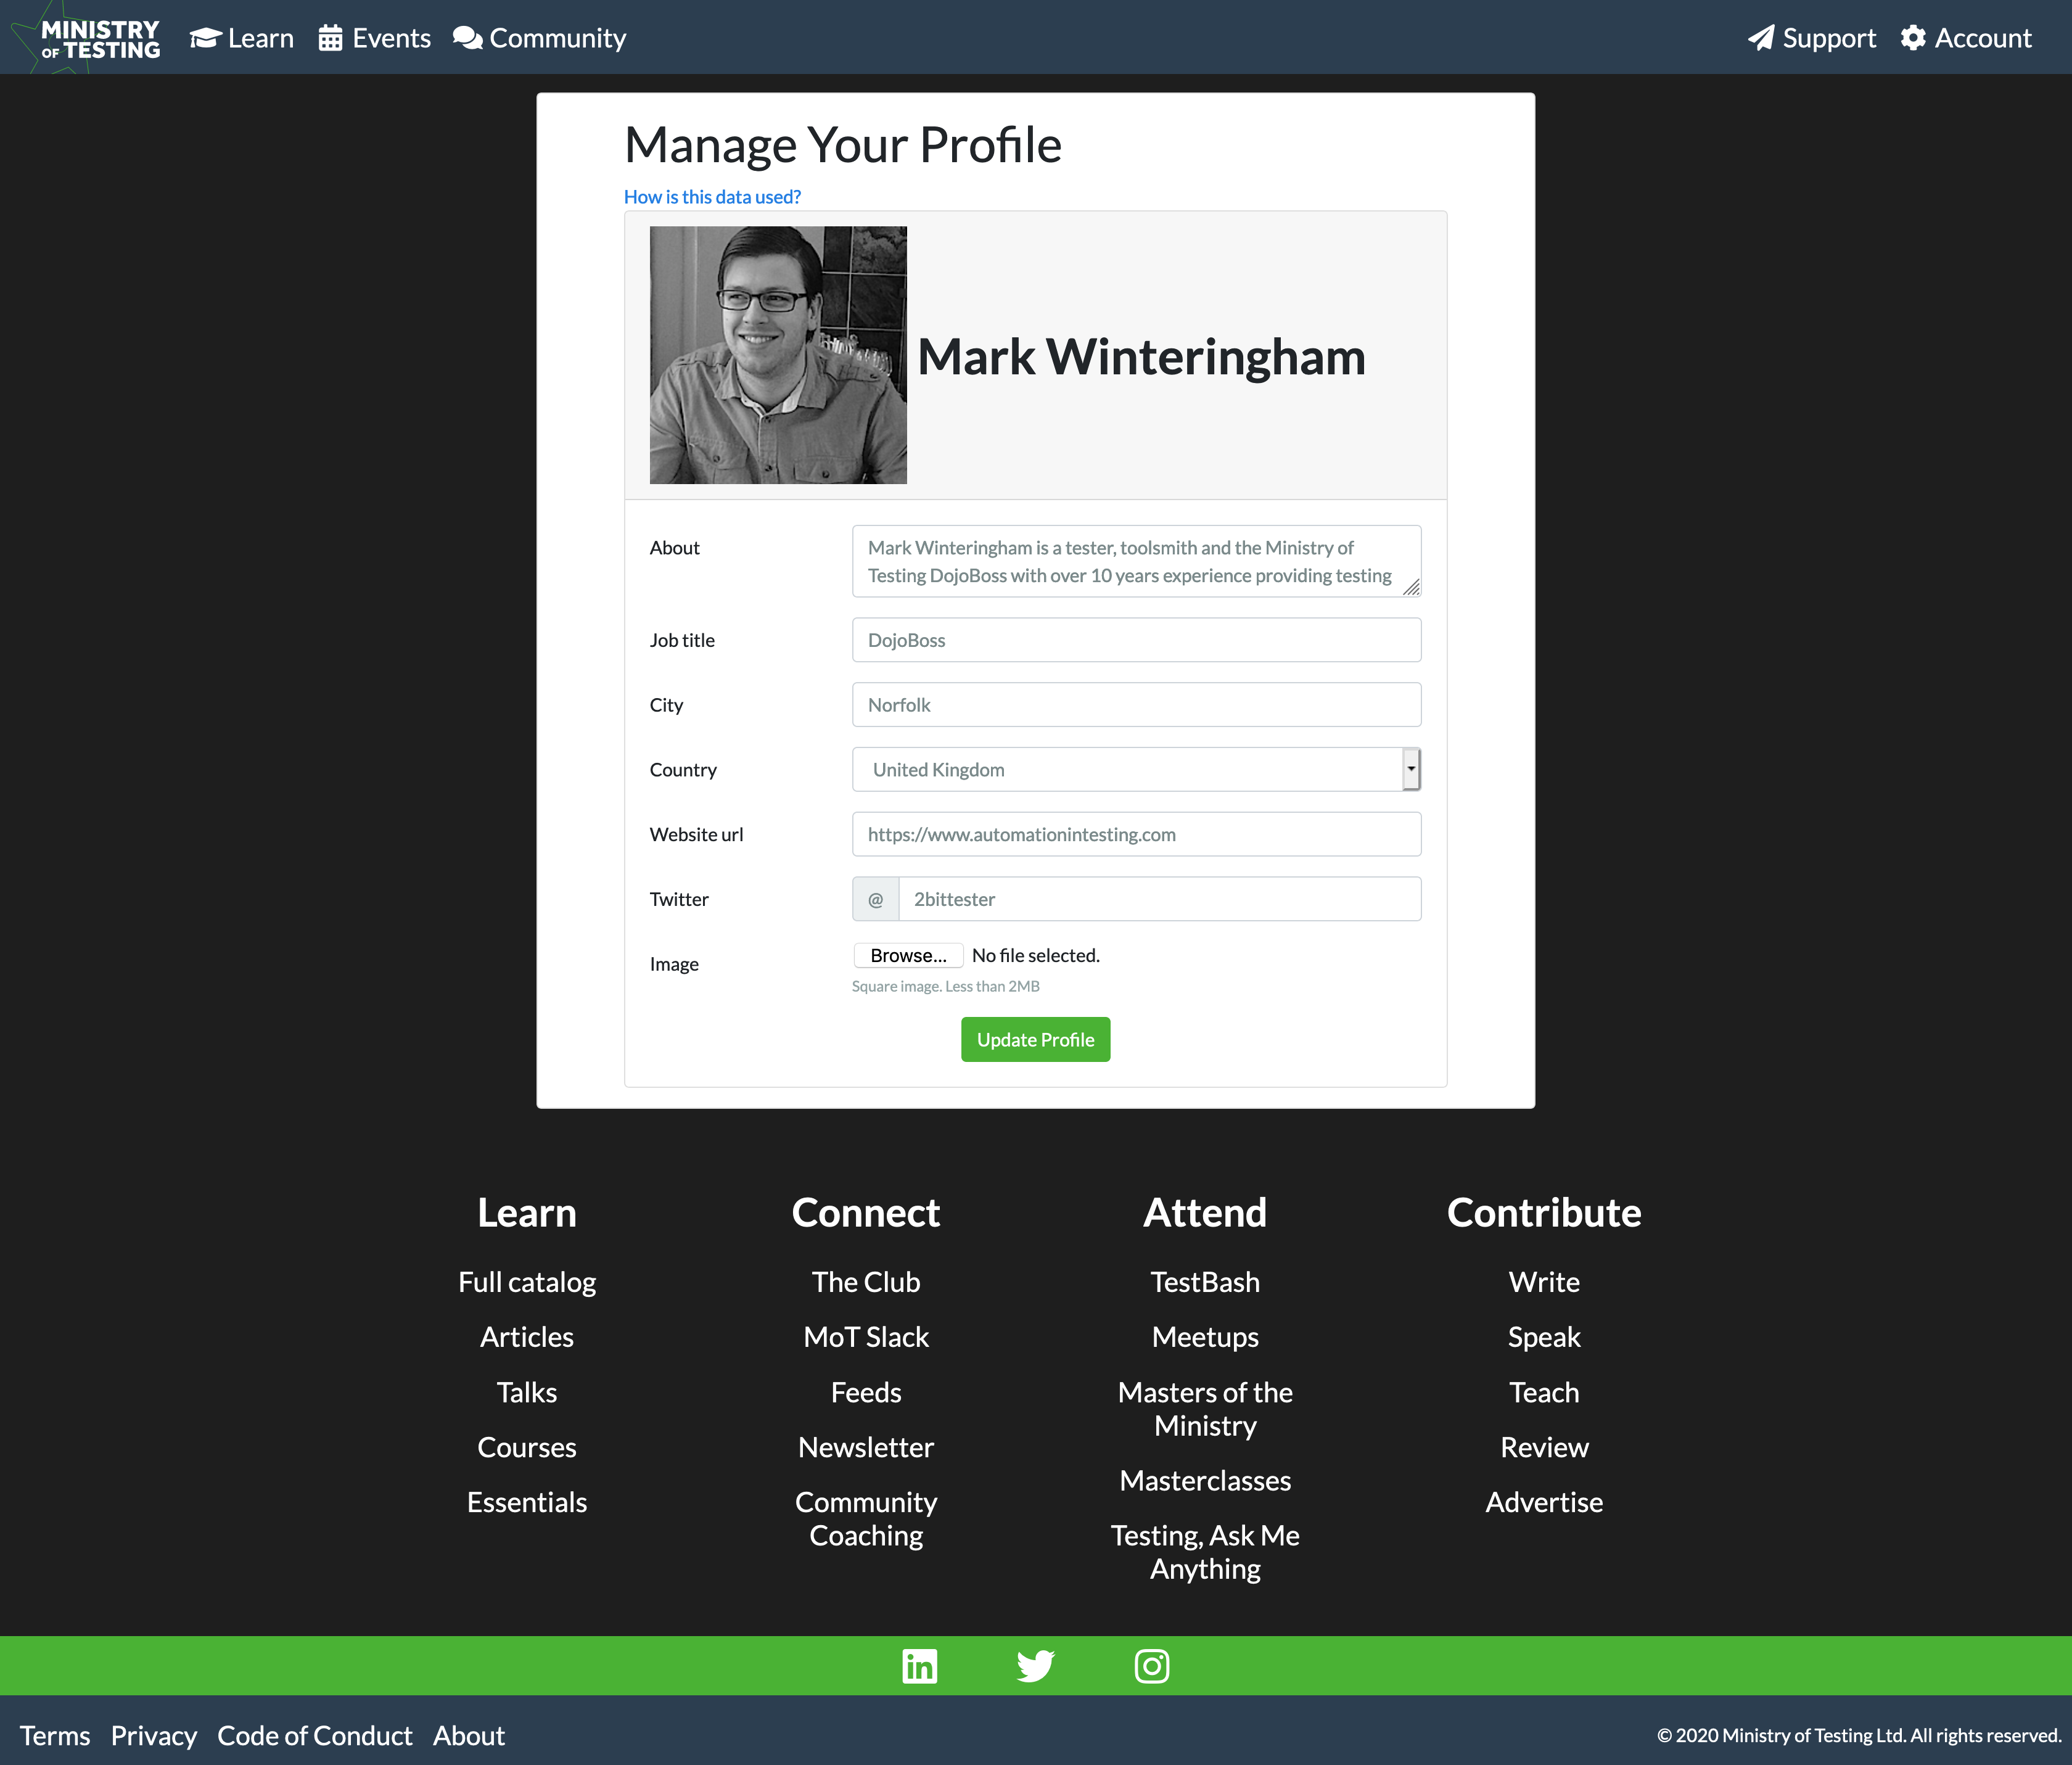 Manage your profile screenshot